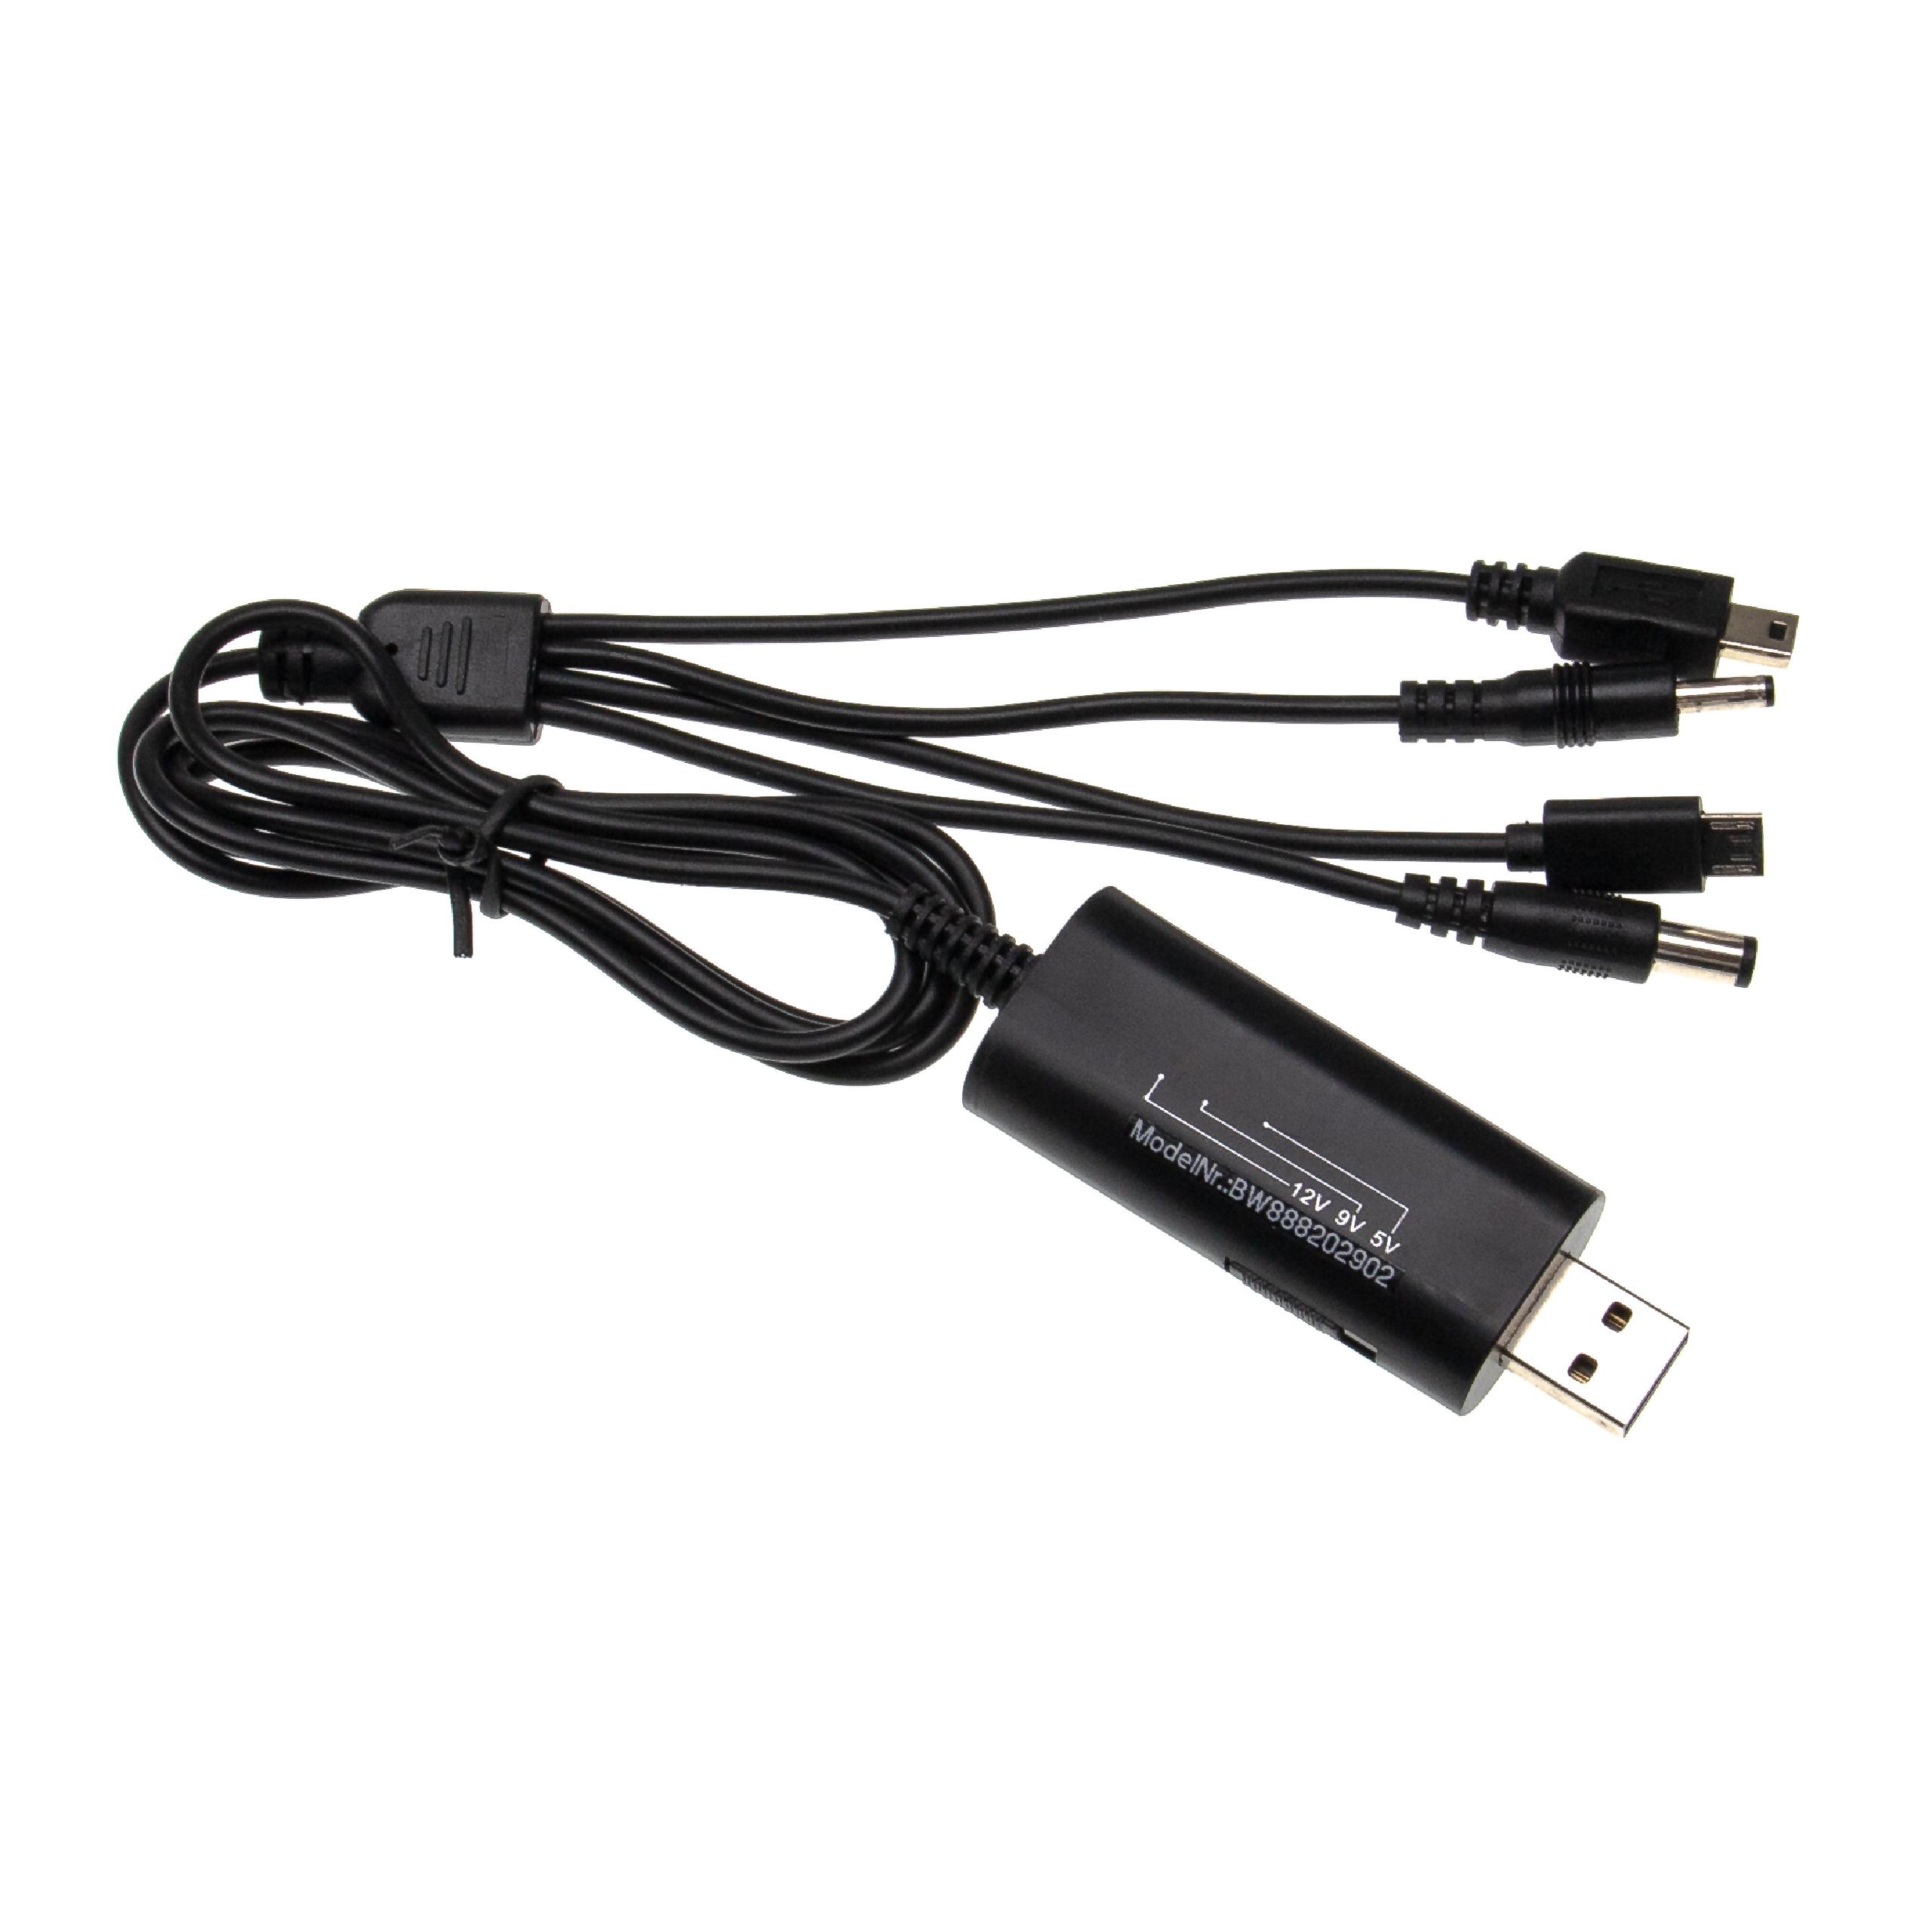 vhbw Universal Multi USB Cable for Diverse Appliances, e.g. Telephones, Mobiles, Smartphones - 4-in-1 Adapte